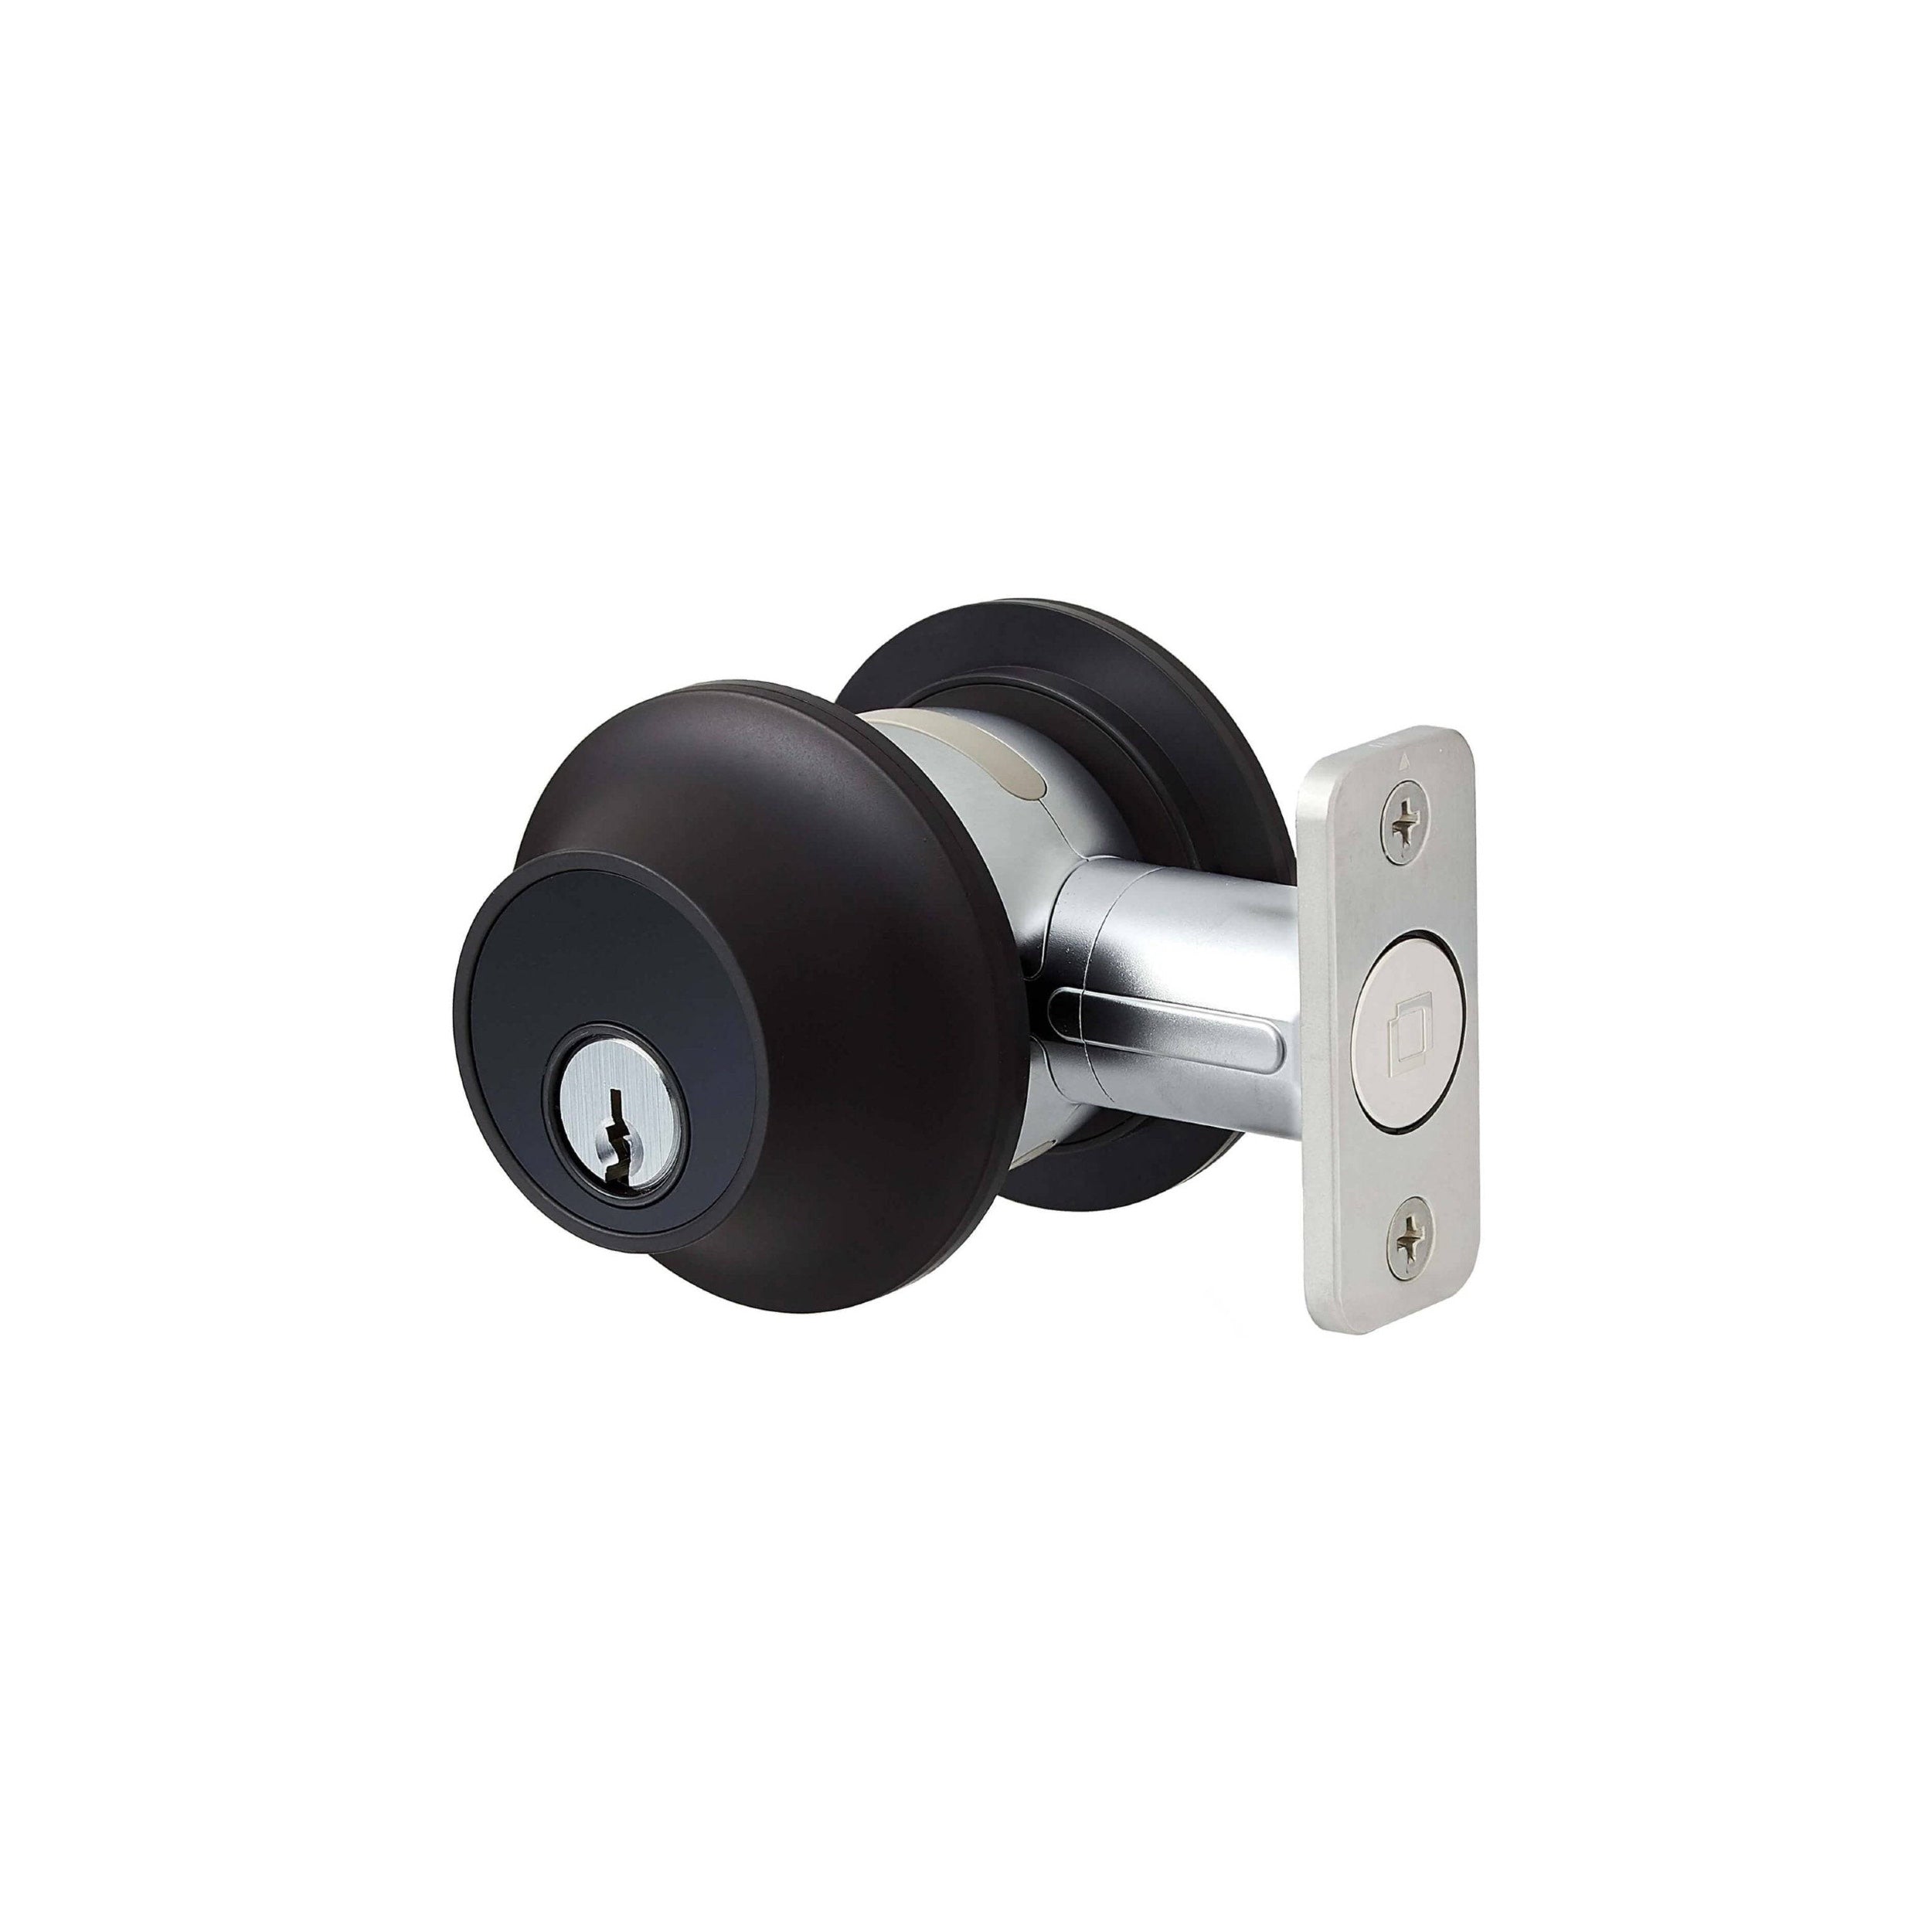 Level Touch Edition Smart Lock